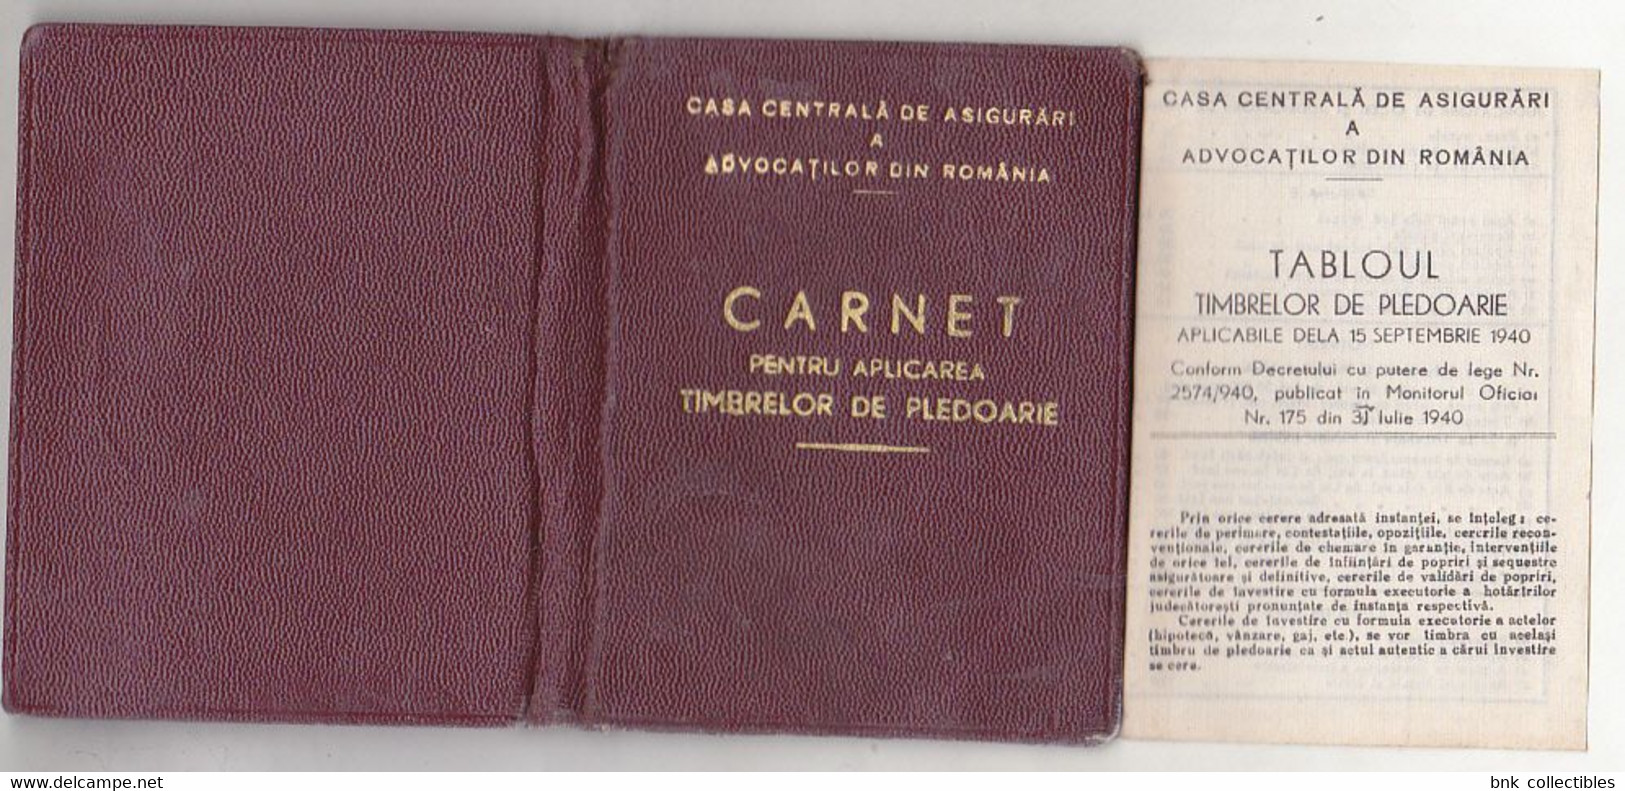 Romania Old Revenue Stamps - 1944 Booklet - The Central Insurance House Of Lawyers In Romania - Revenue Stamps